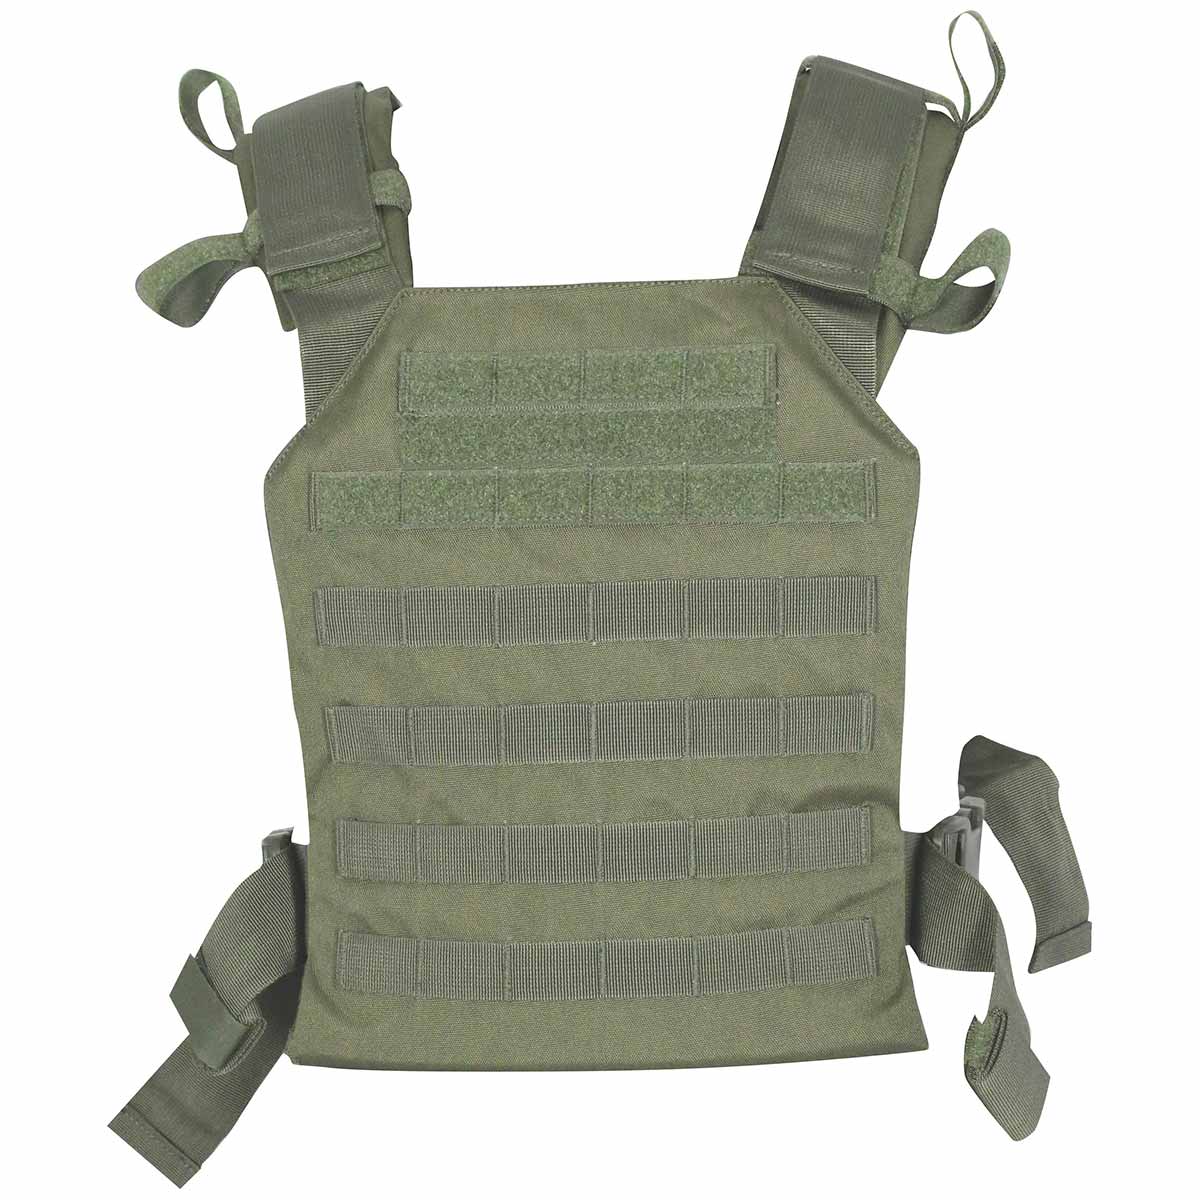 Viper Triple Mag Plate Military Police Tactical Security Hunting MOLLE Green 